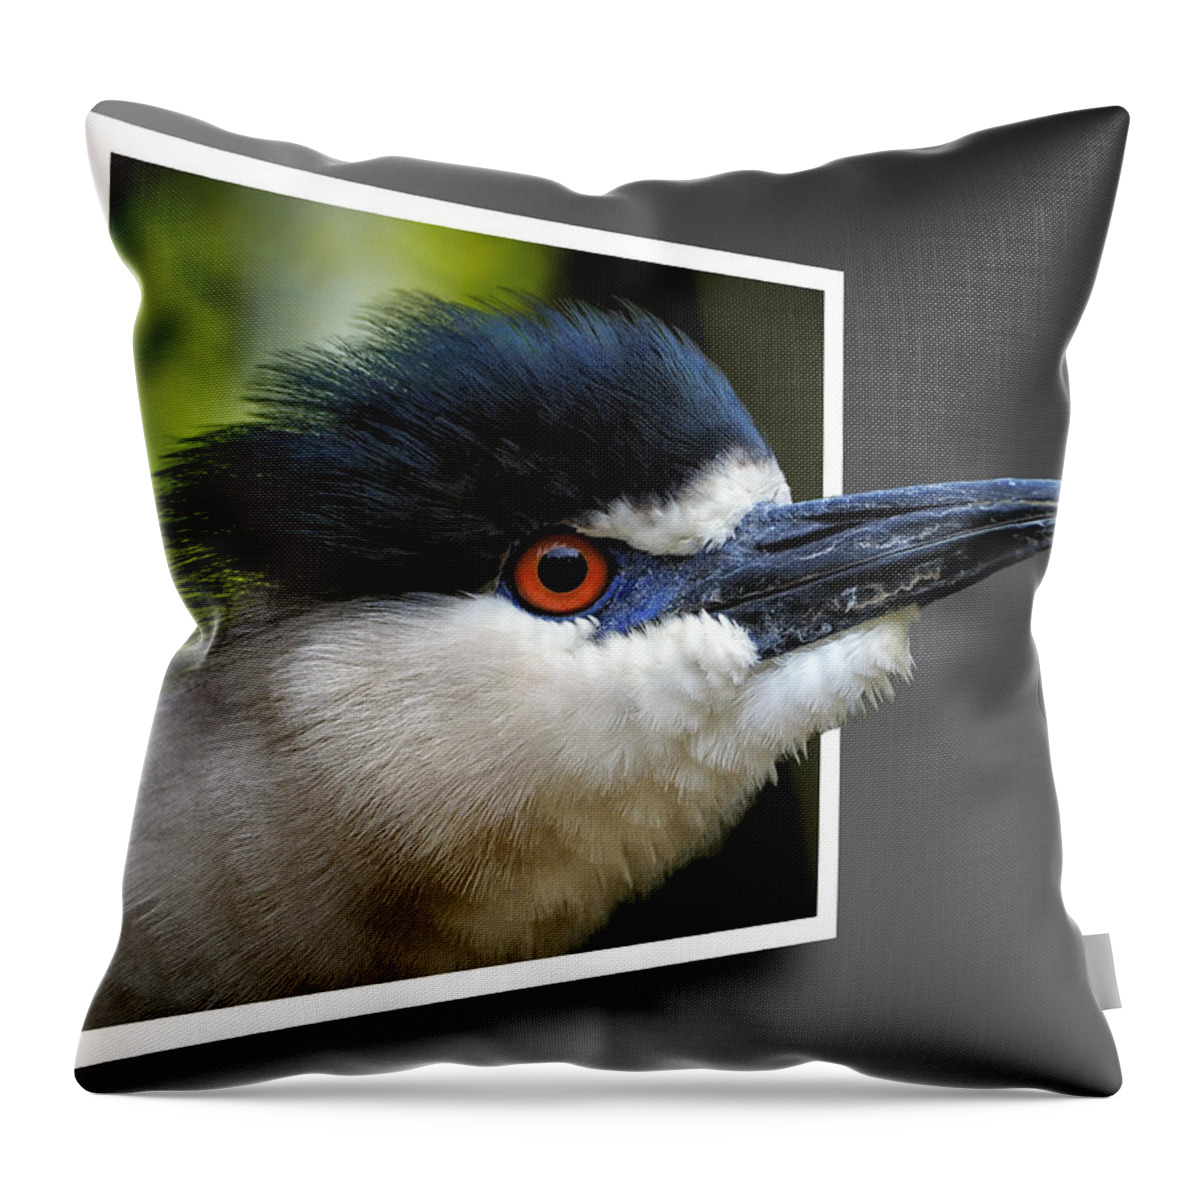 Black Crowned Night Heron Throw Pillow featuring the photograph Black Crowned Night Heron Out Of Bounds by Bill Swartwout